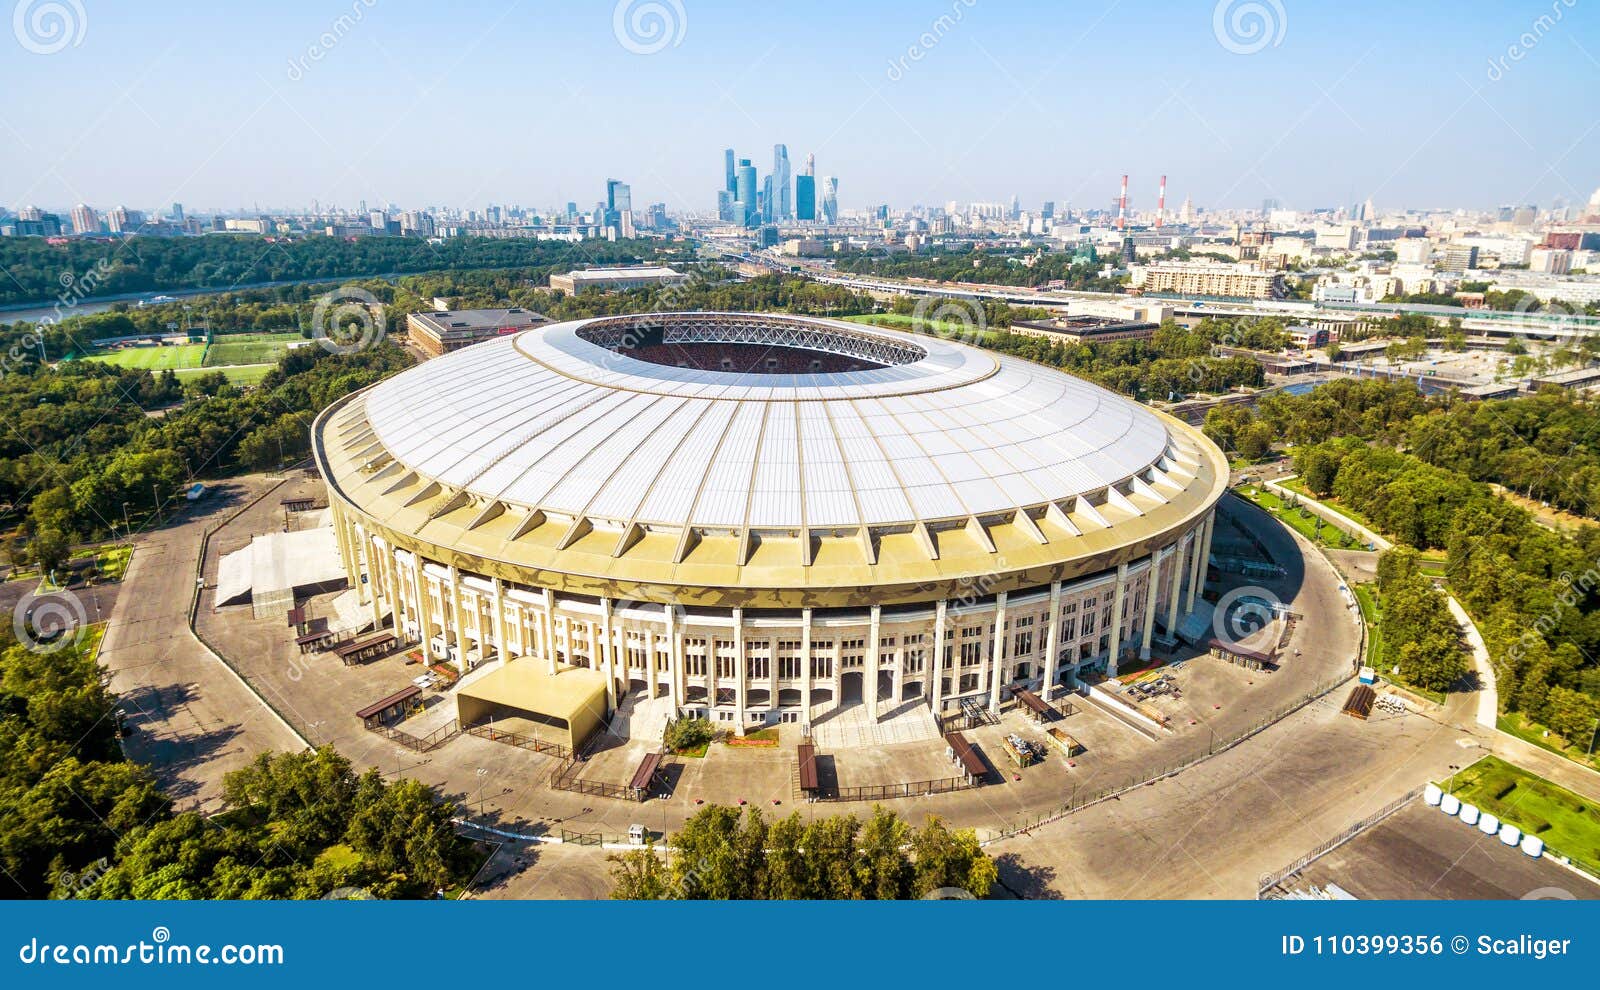 Luzhniki and Spartak: The largest Moscow stadiums / News / Moscow